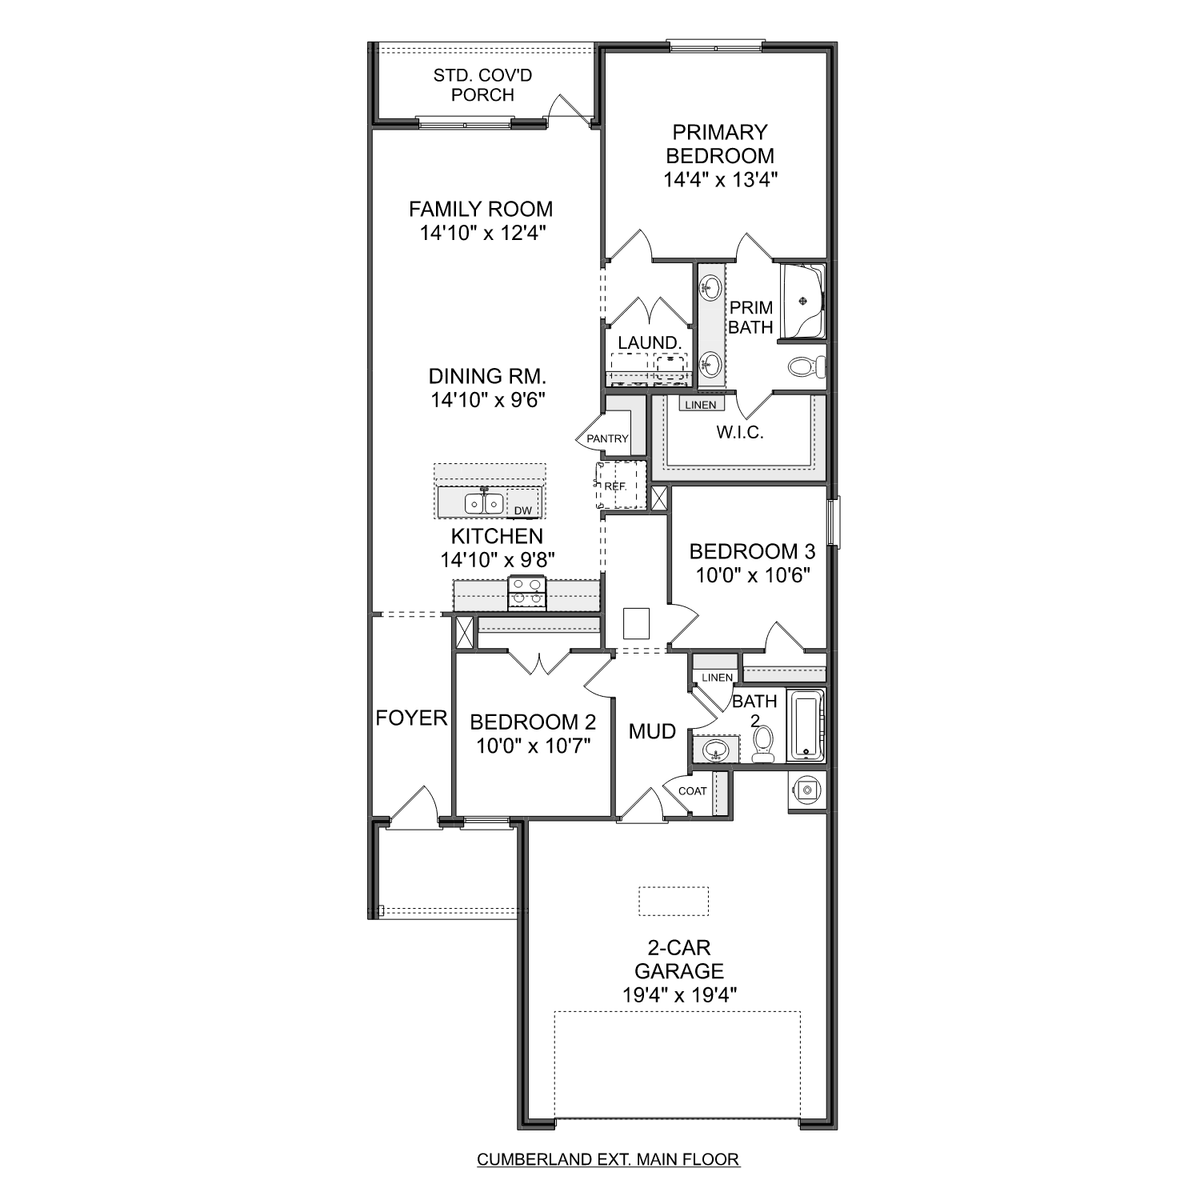 1 - The Cumberland B floor plan layout for 3135 Lea Lane SE in Davidson Homes' Hollon Meadow community.